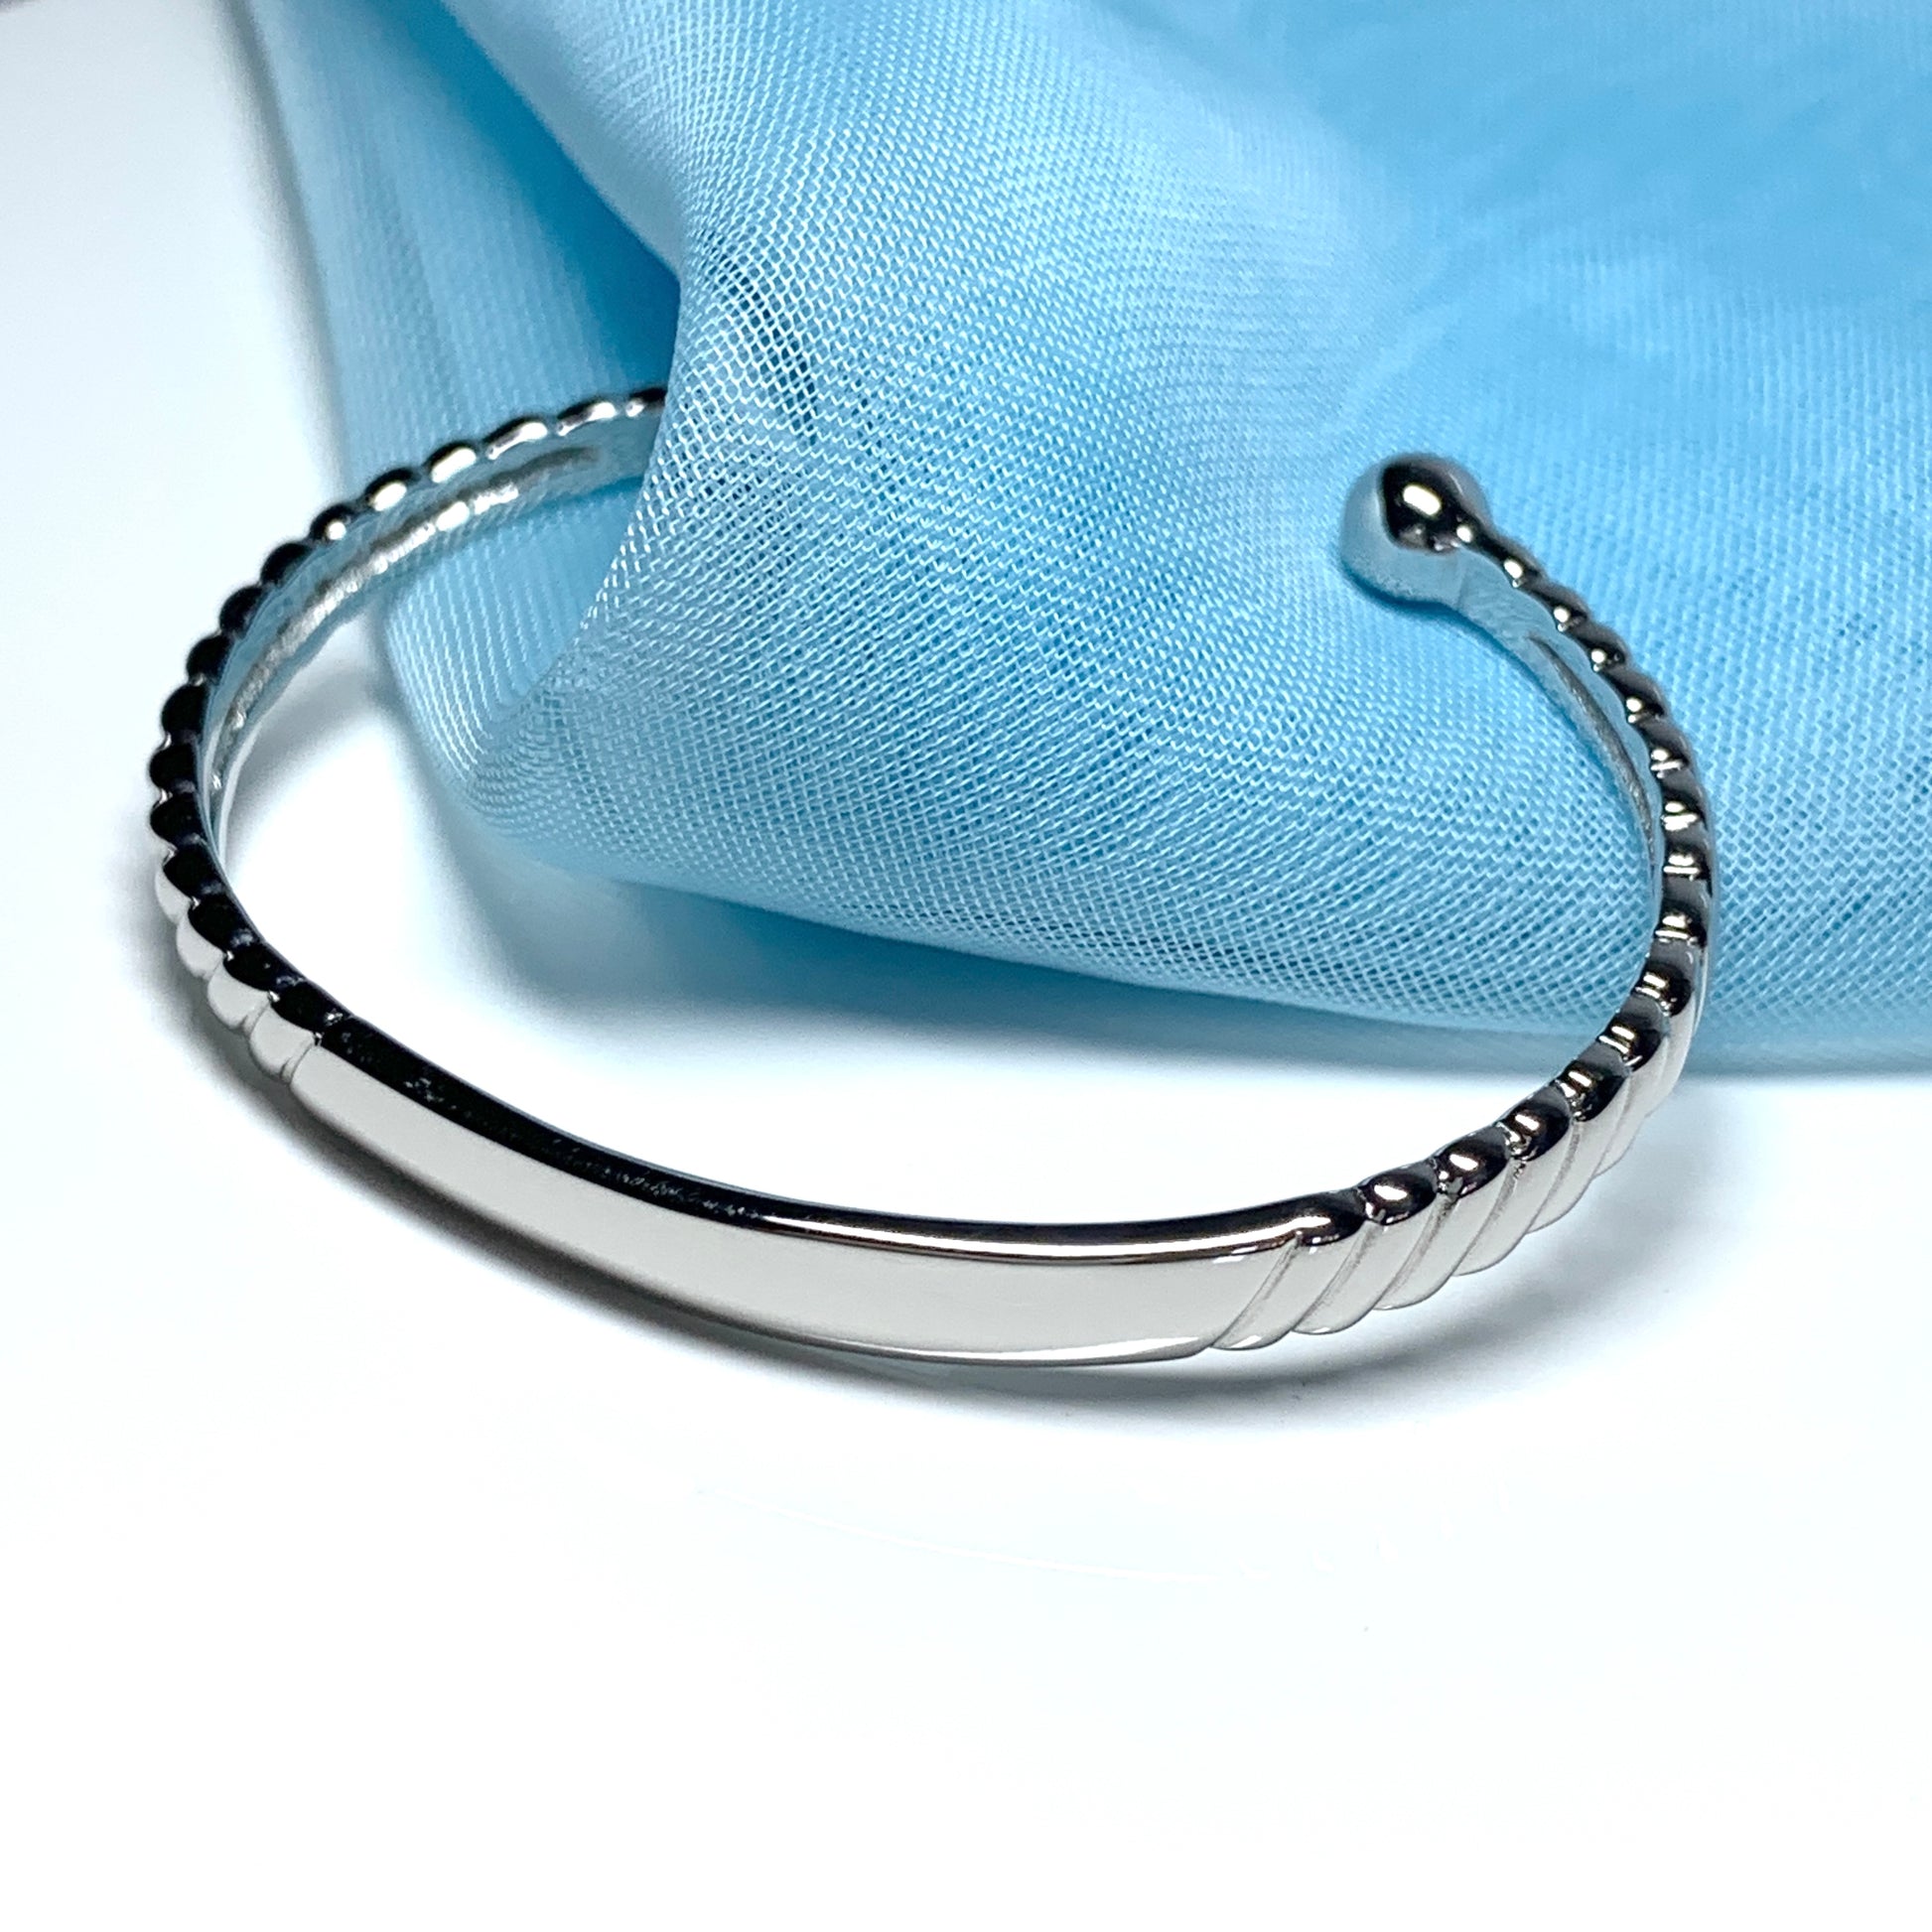 Sterling silver baby's solid torque bangle with a plain section for engraving